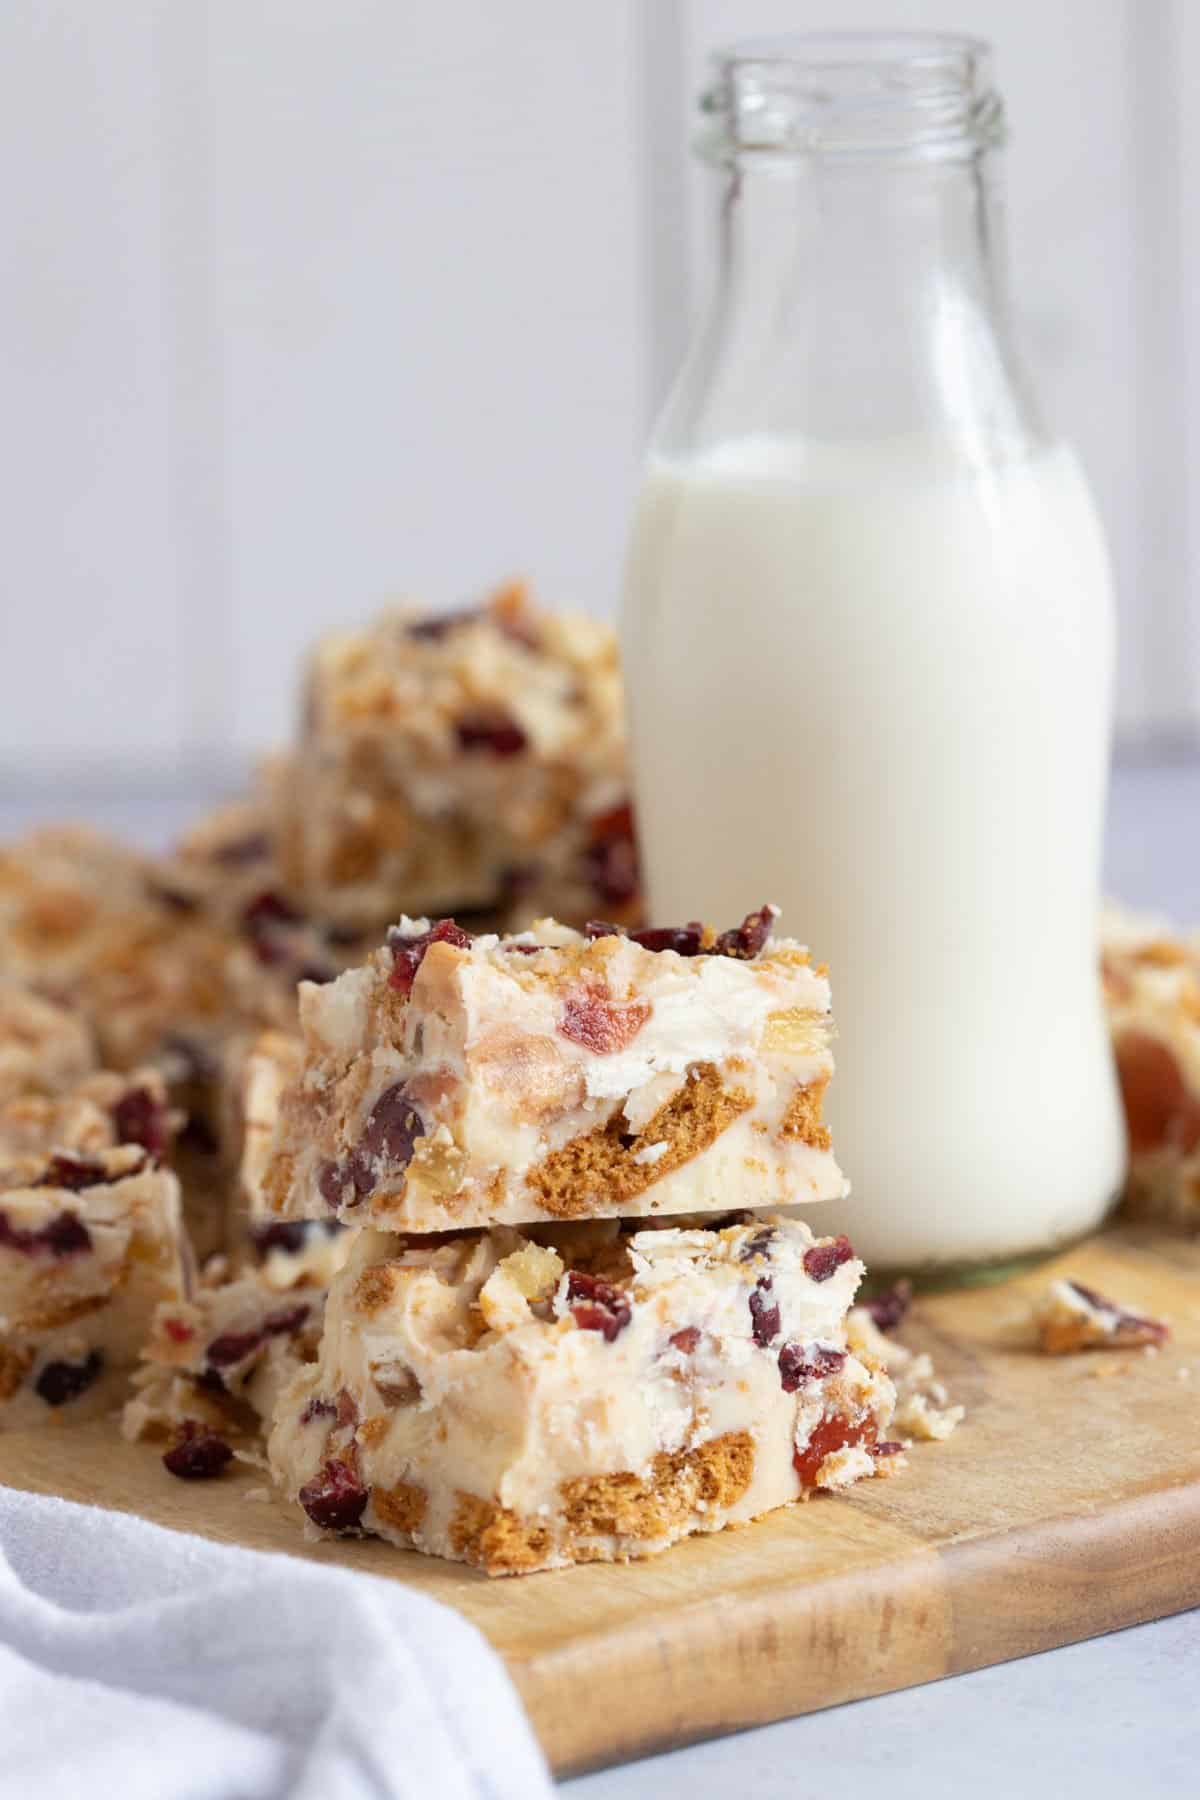 White chocolate tiffin with a glass of milk.